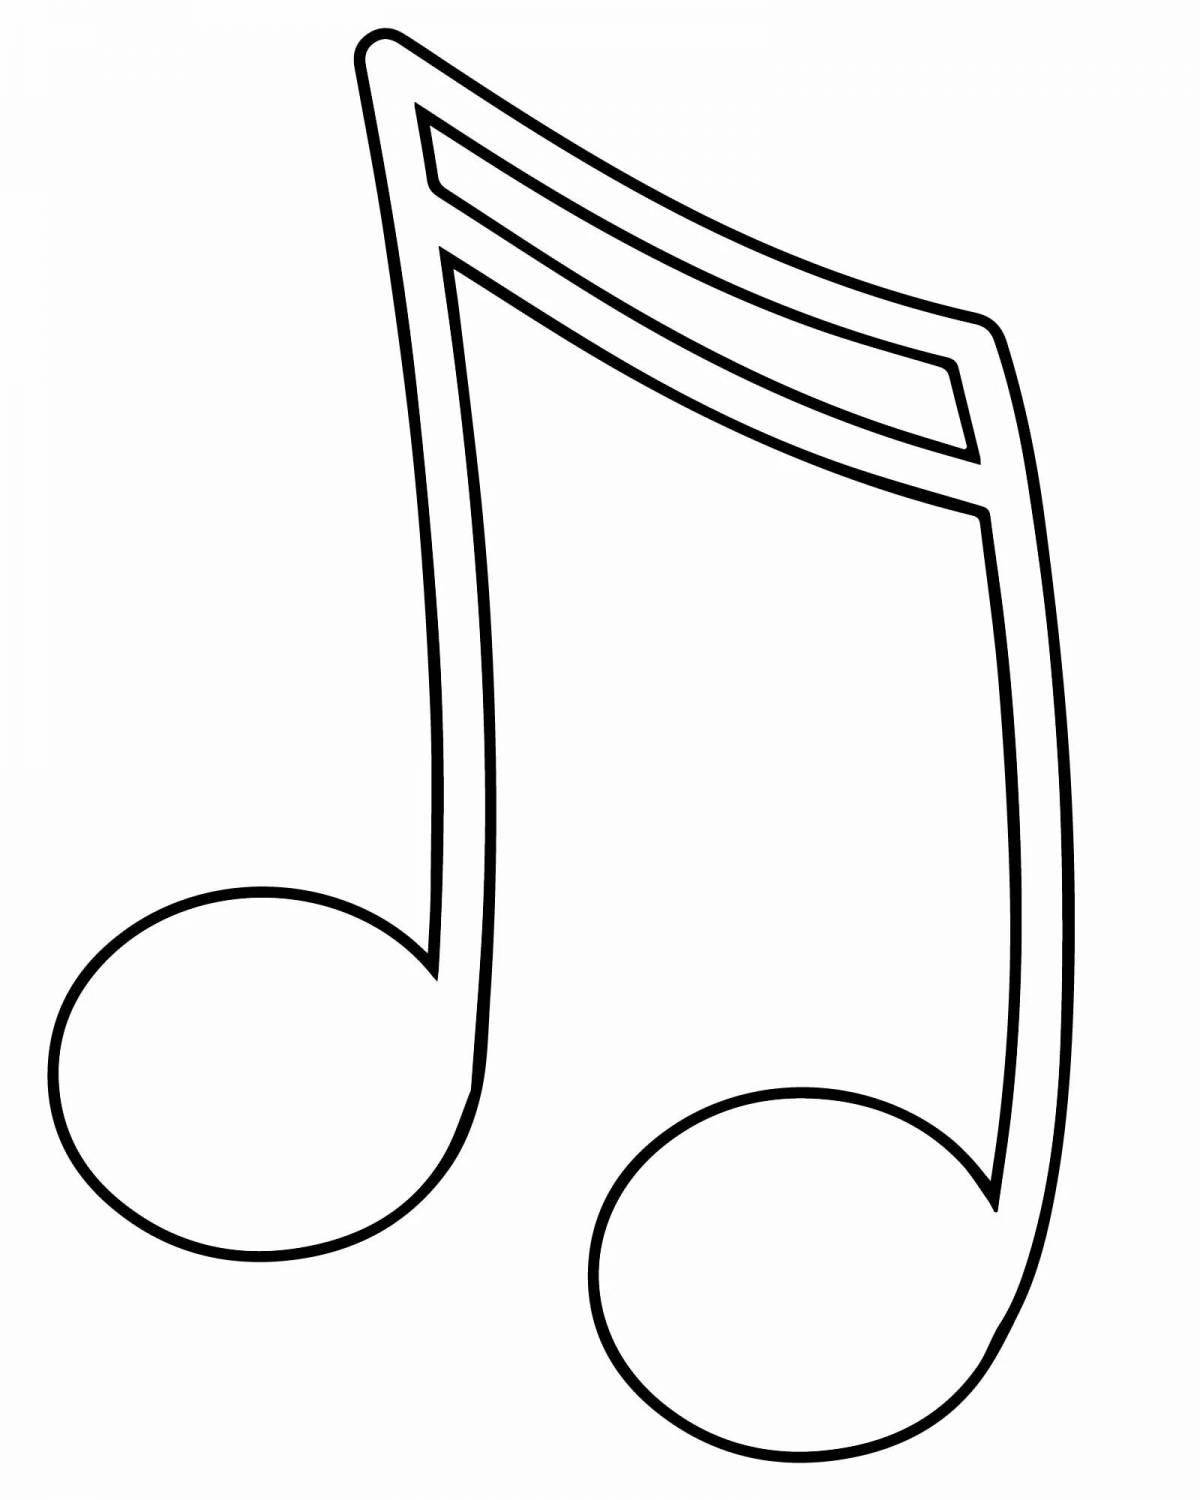 Inspirational coloring page melody